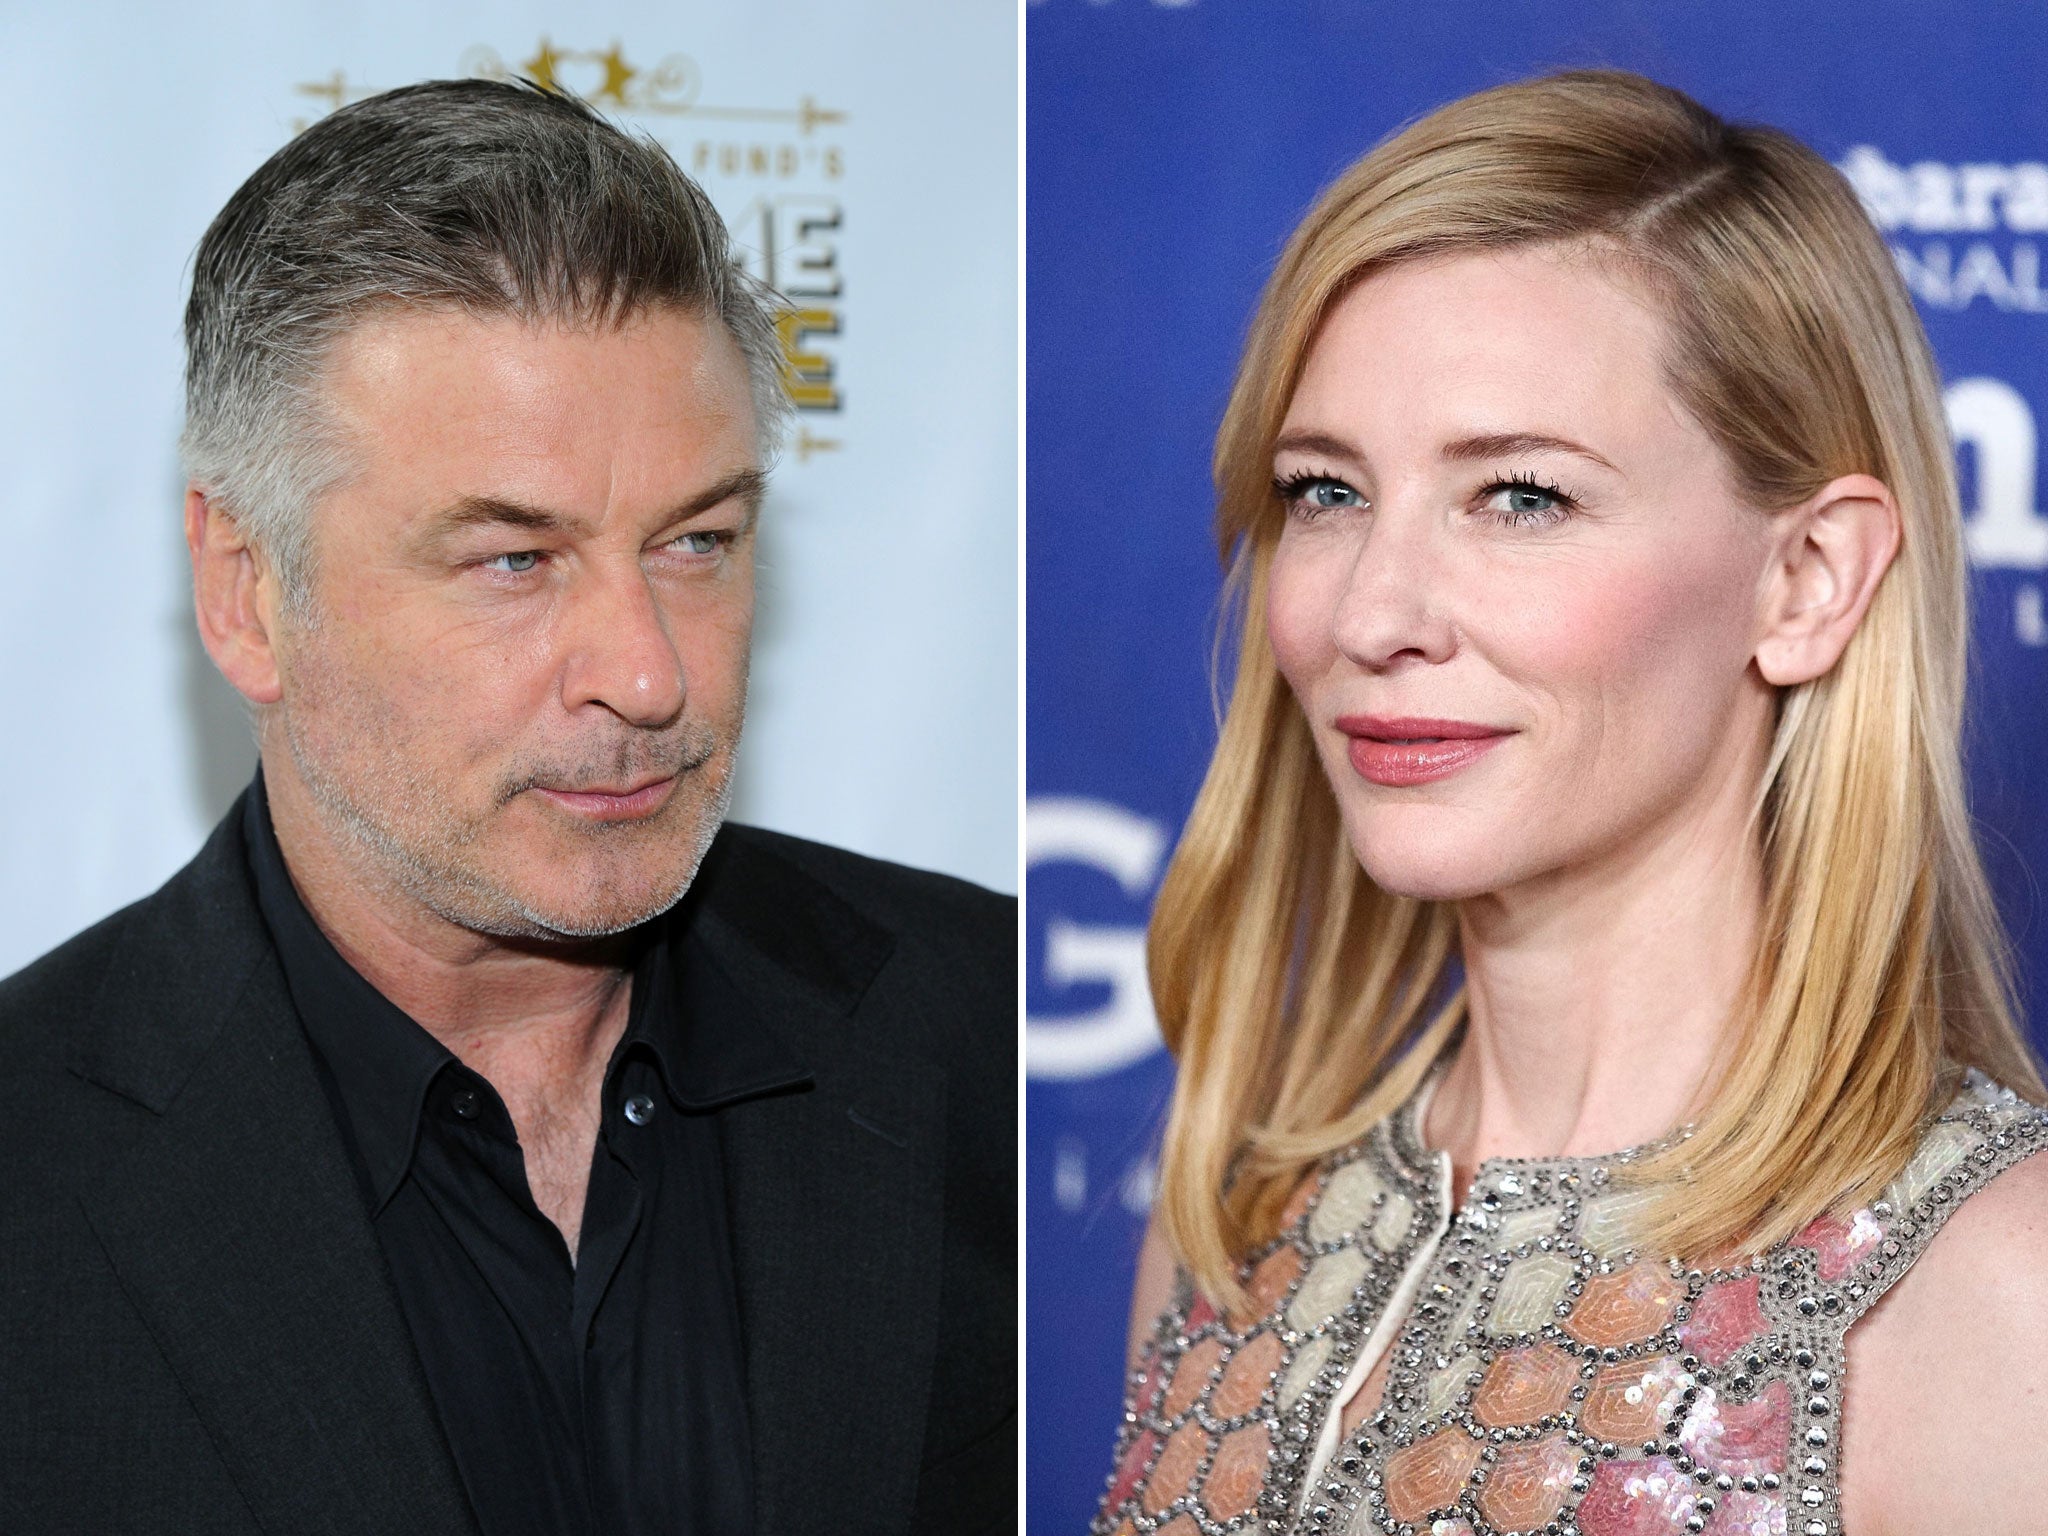 Actors Alec Baldwin and Cate Blanchett have responded to being singled out in an open letter, written by Dylan Farrow, containing allegations of sex abuse against Woody Allen